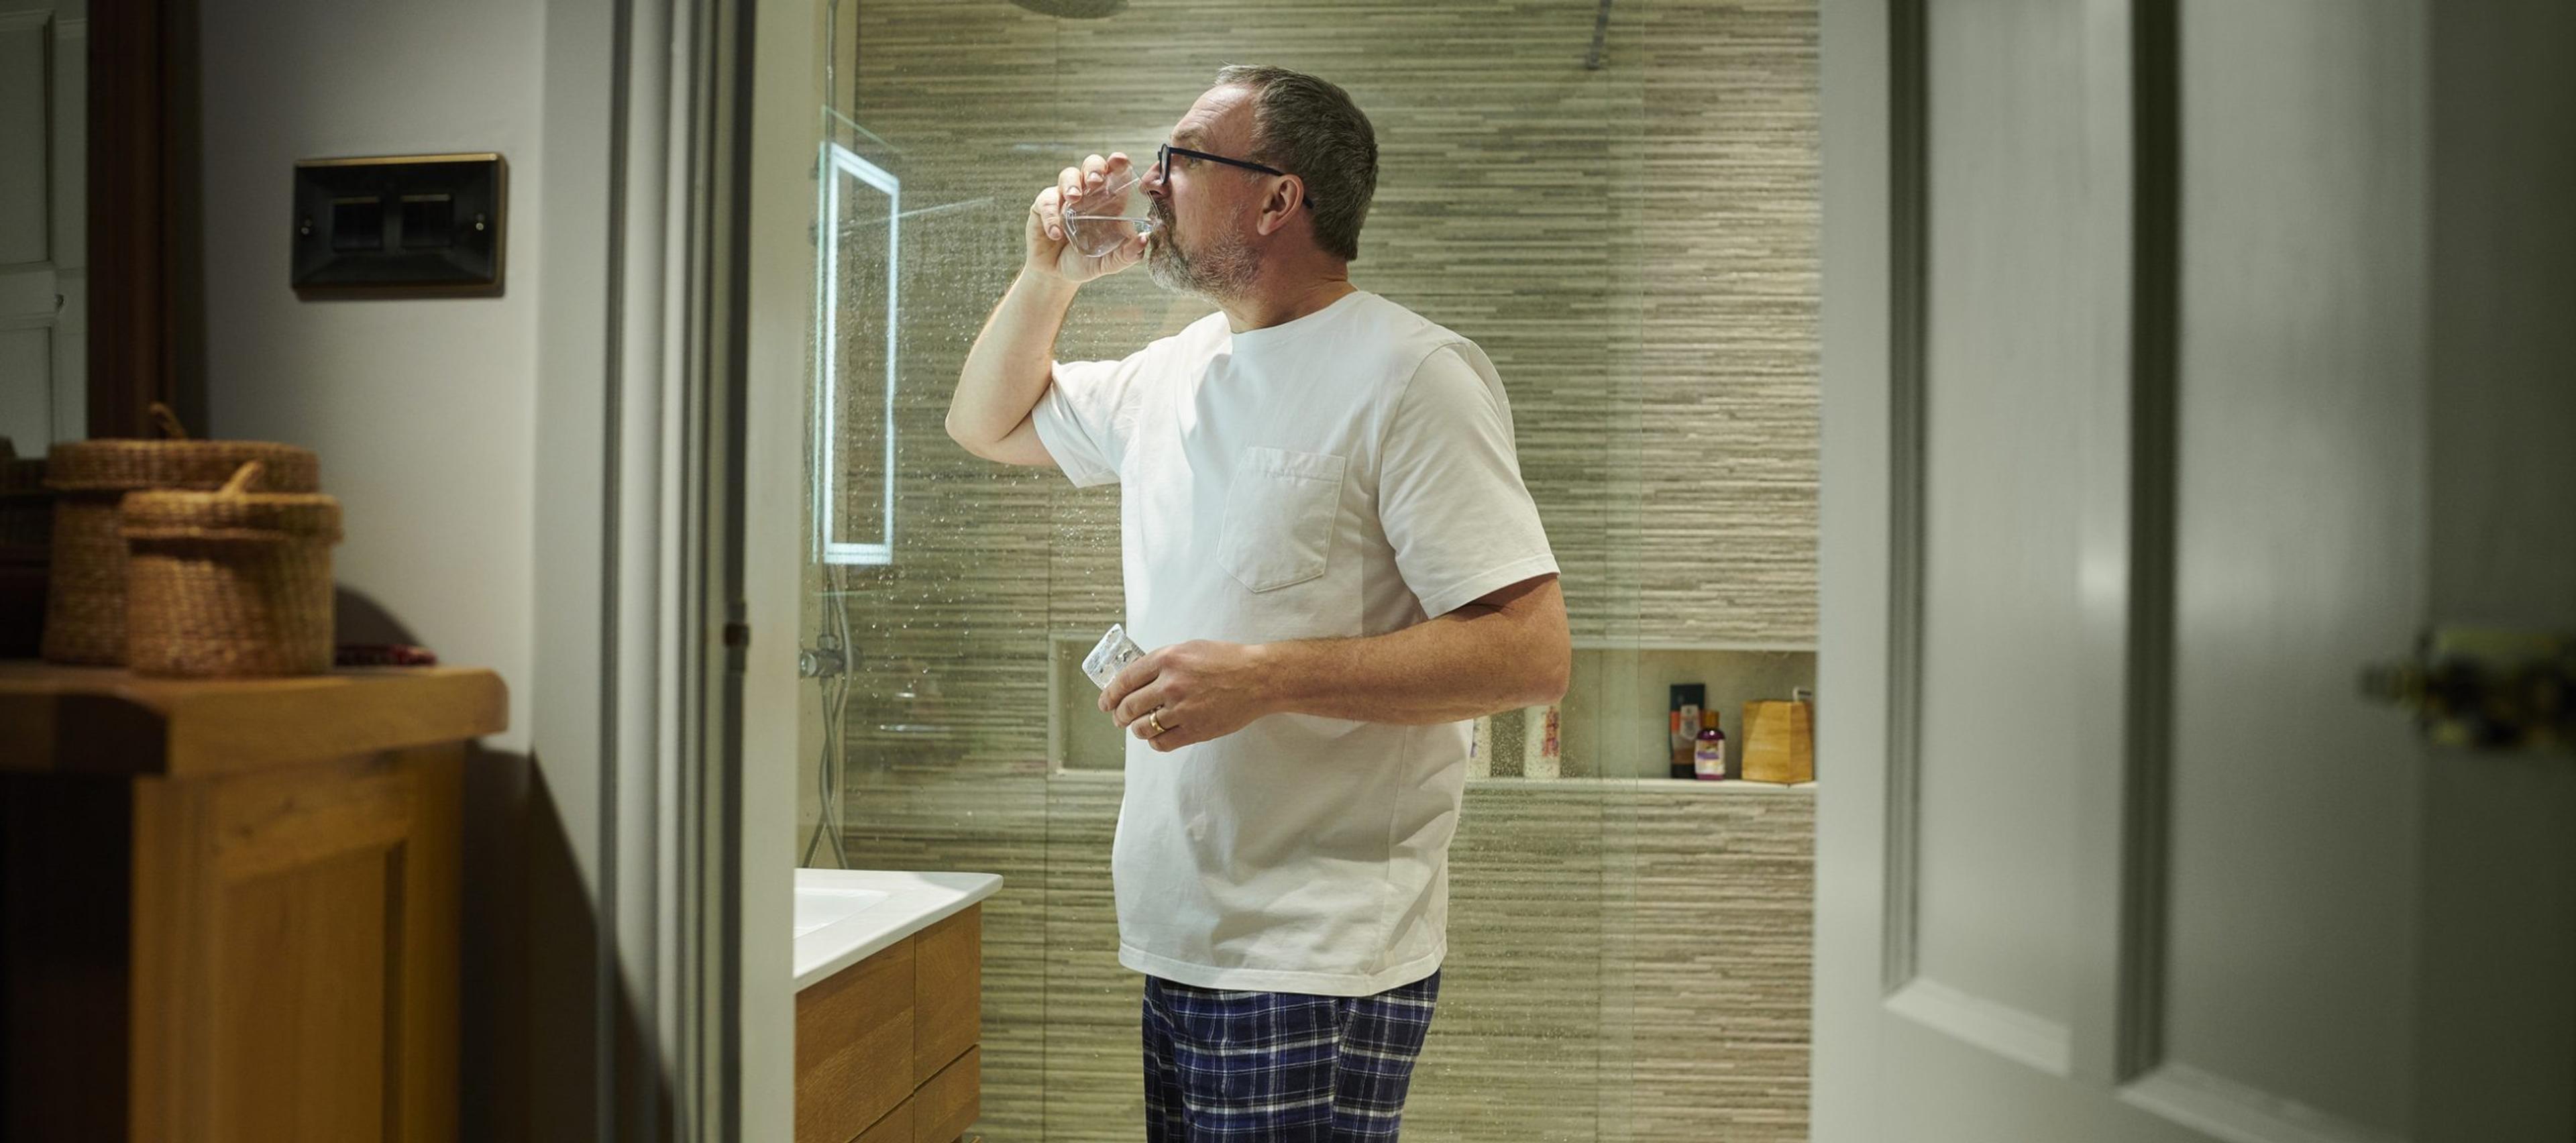 Older man drinks a glass of water in his bathroom as he does colonoscopy prep